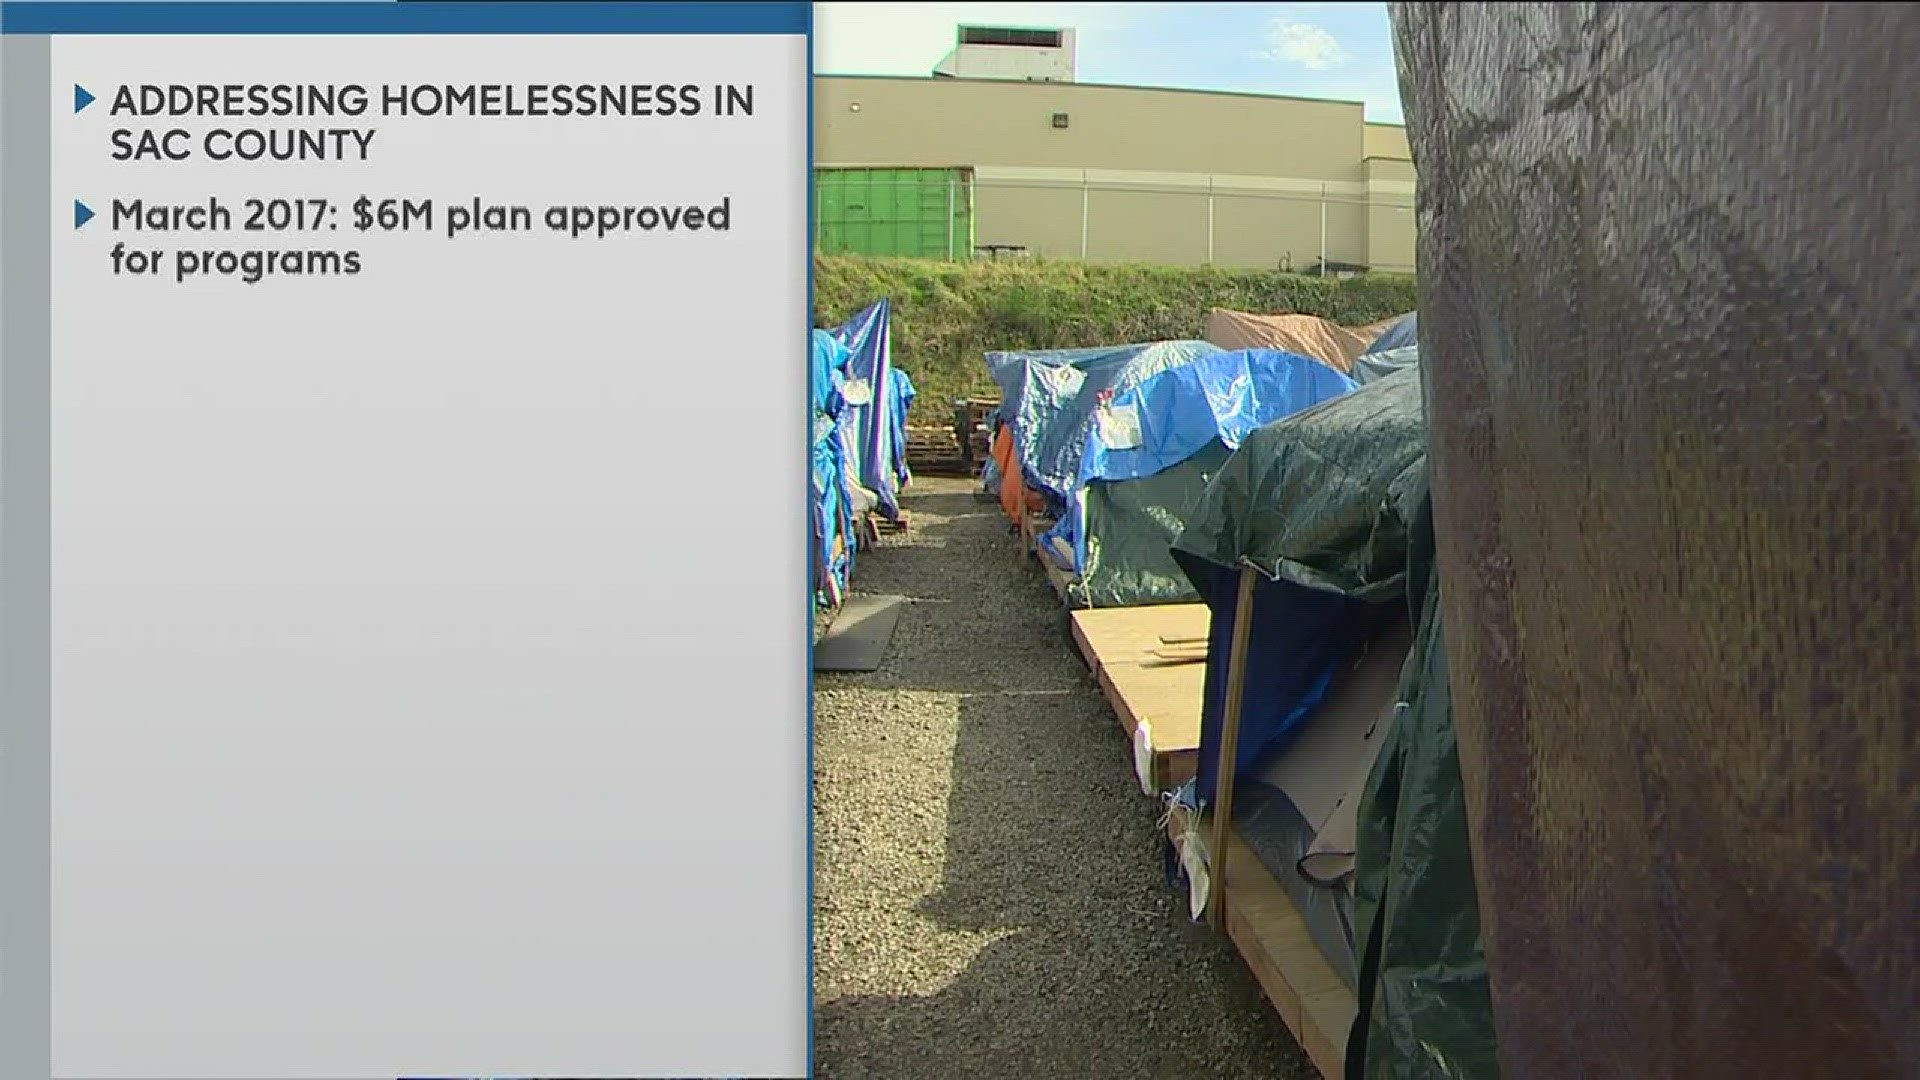 Local leaders continue to explore options to help the homeless